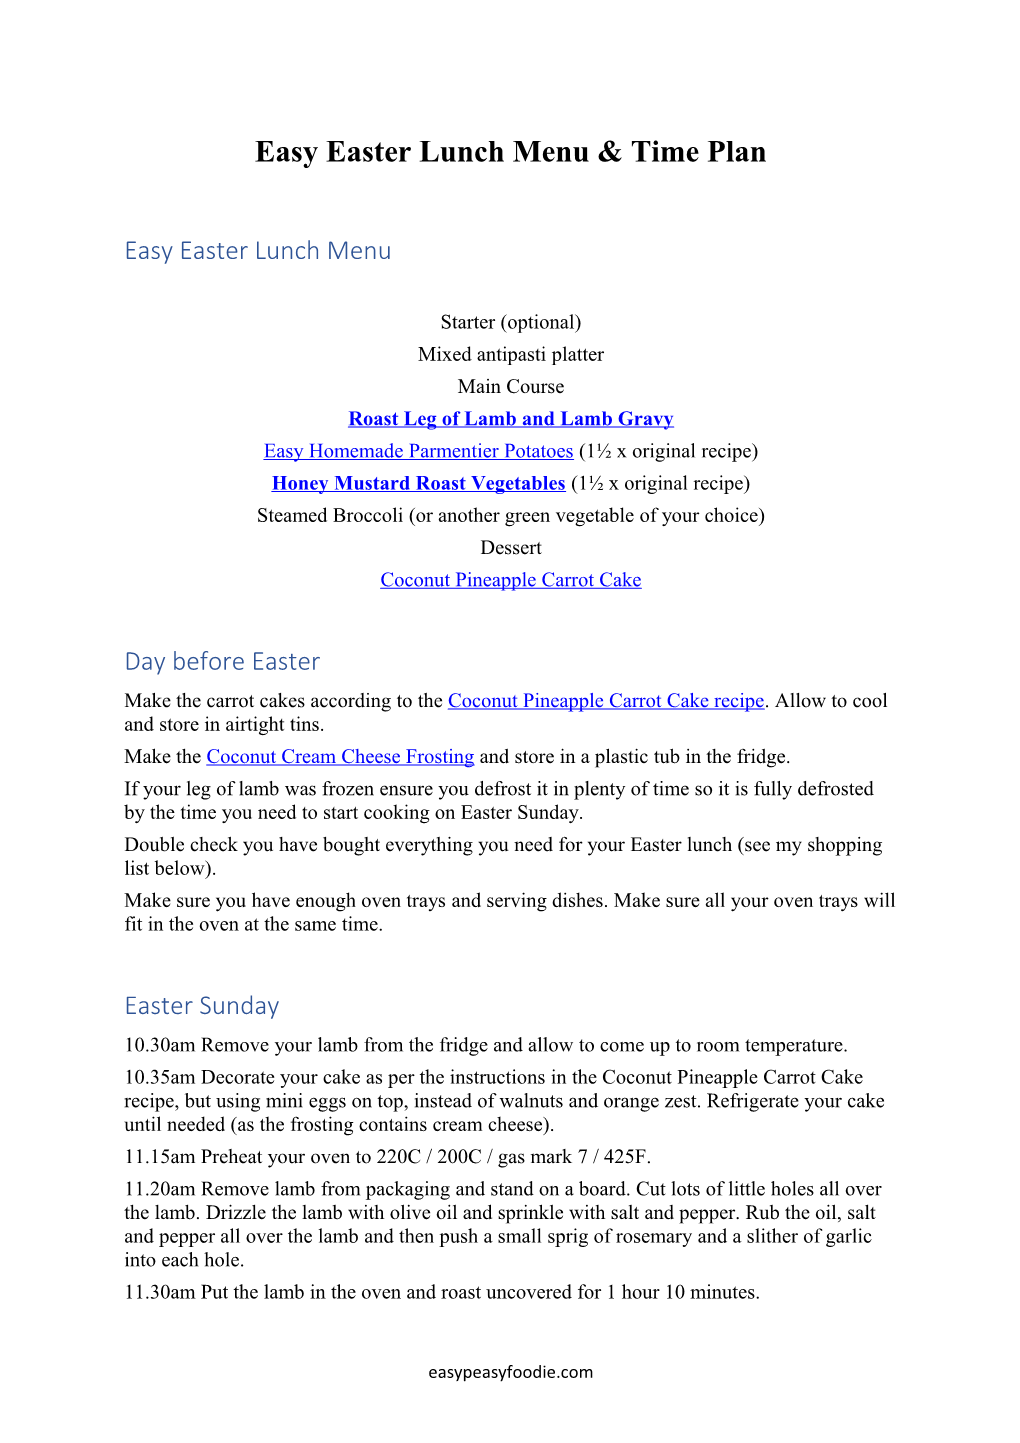 Easy Easter Lunch Menu & Time Plan